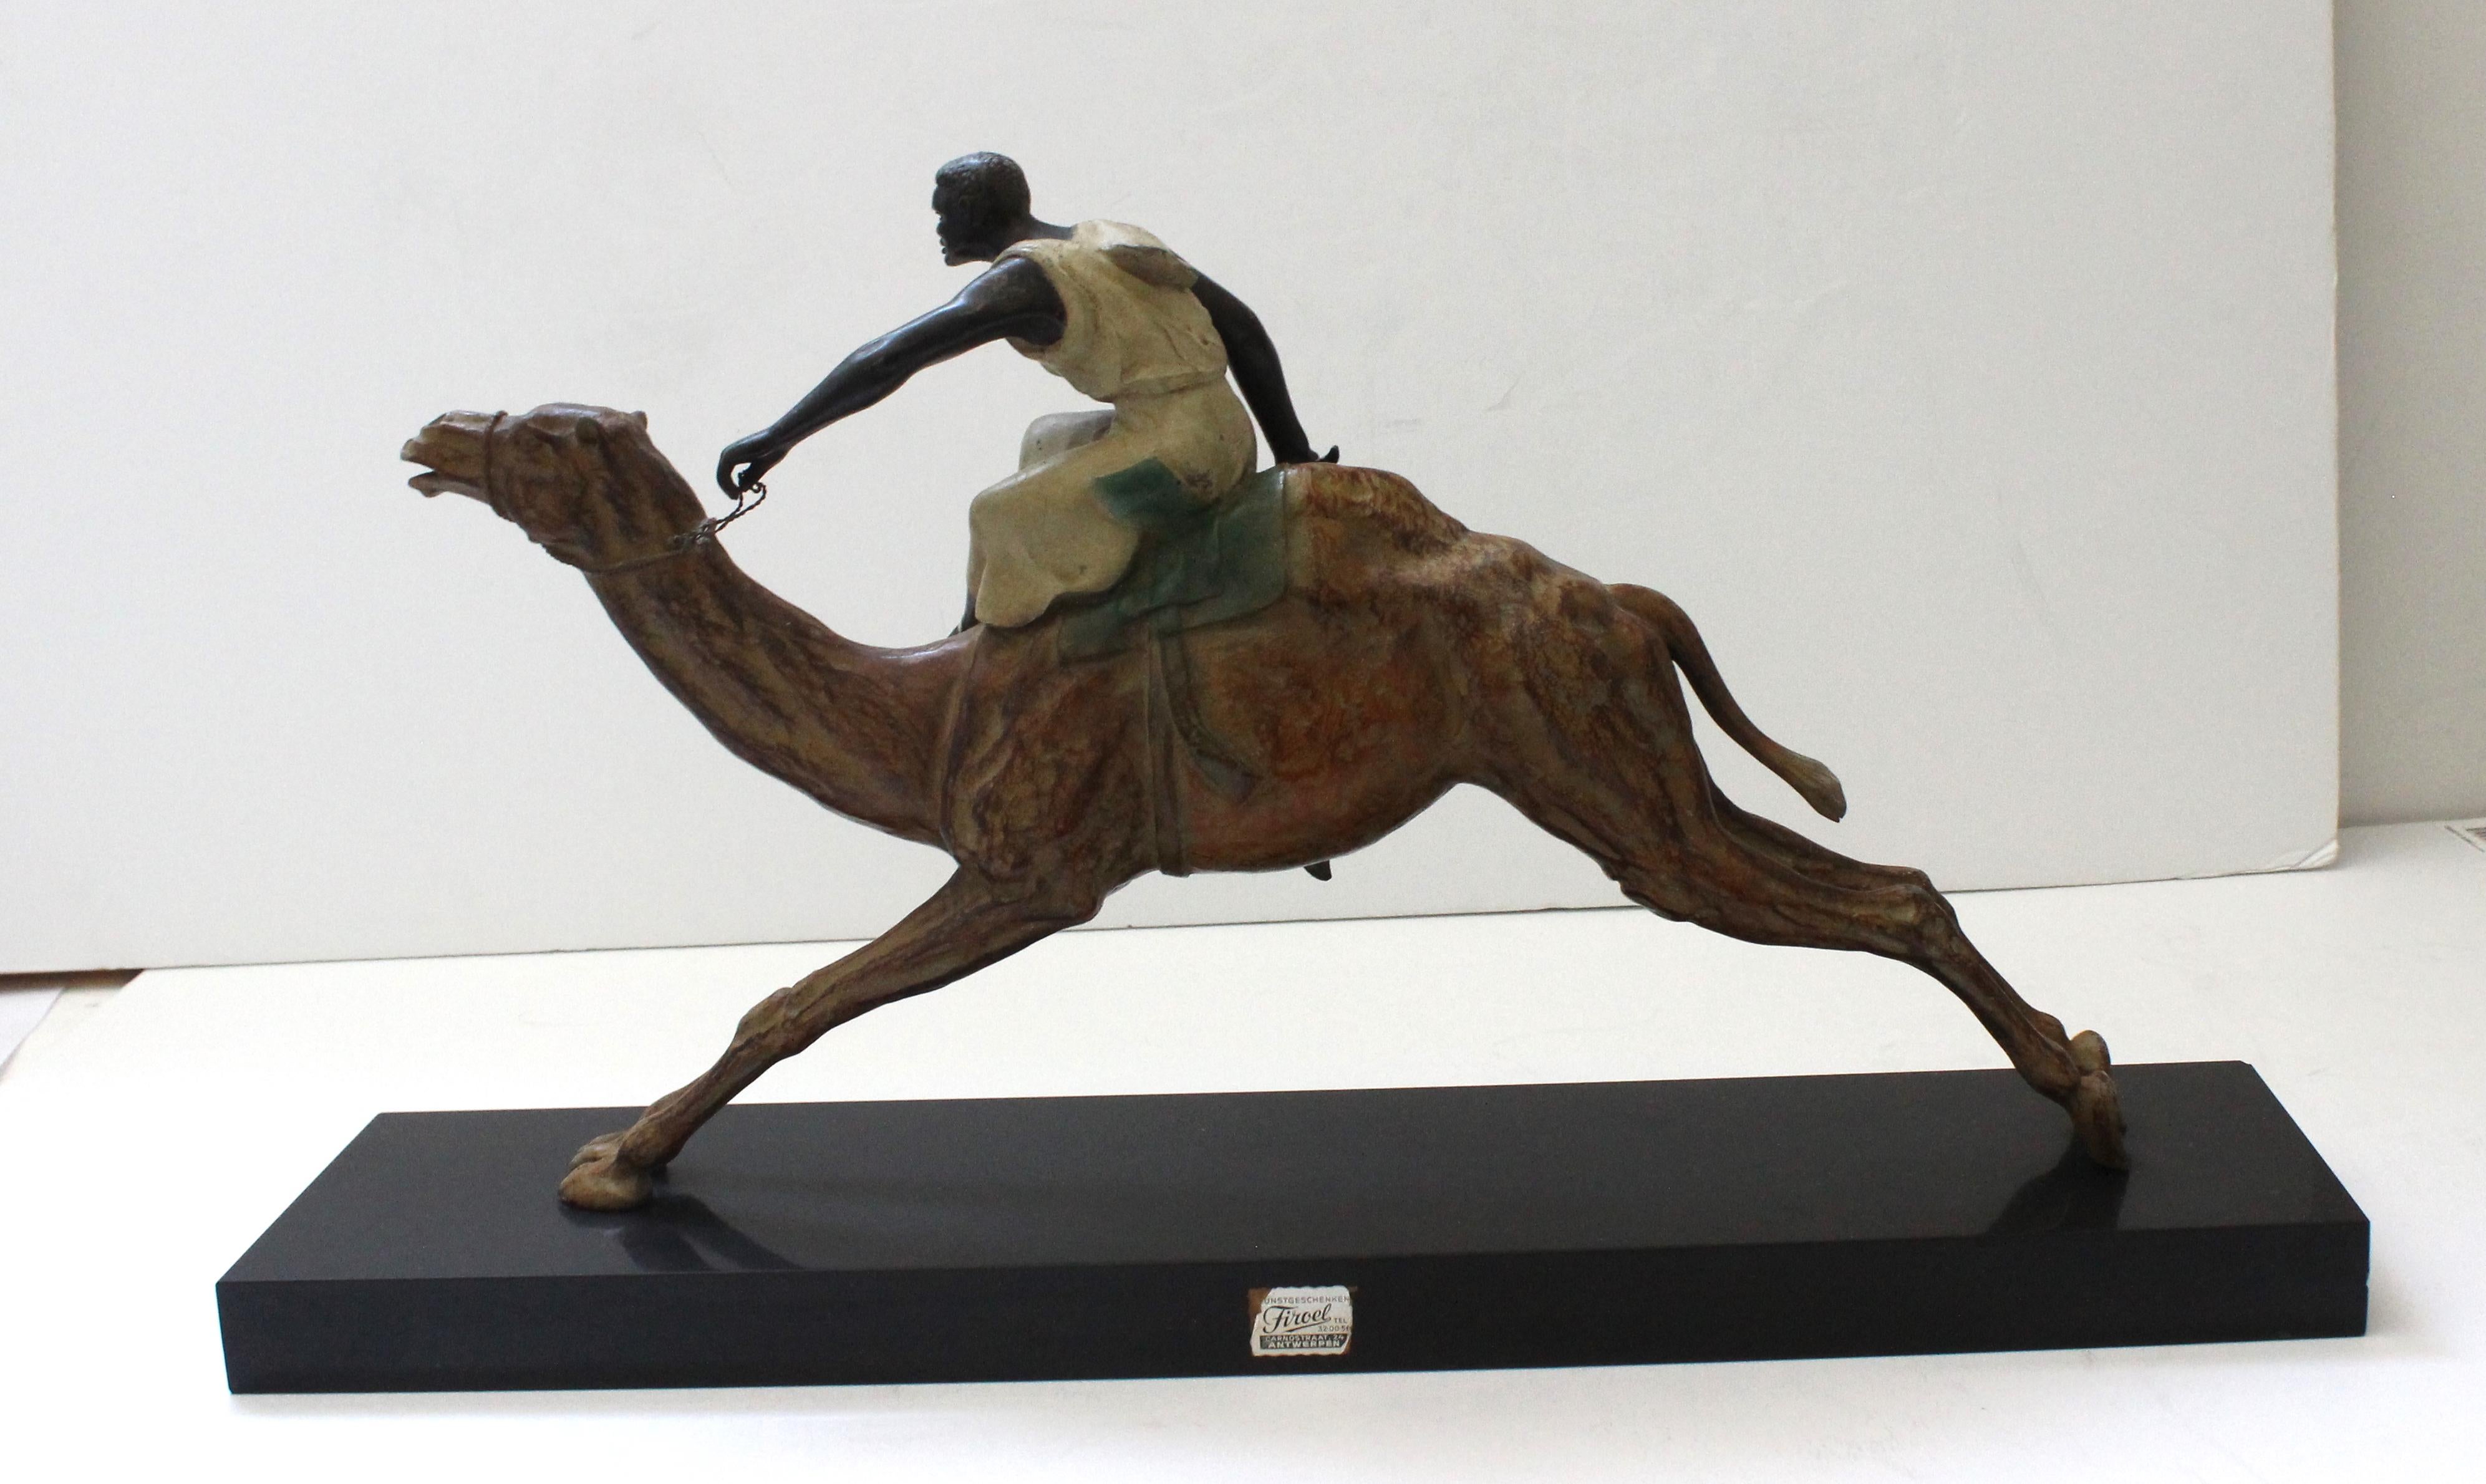 This large scale Viennese style figure of a camel and rider dates to the 1920s and 1930s, and the piece is fabricated in a hand painted, base-metal, and a black granite base. The piece is reminiscent of the Viennese, cold-painted bronzes so popular